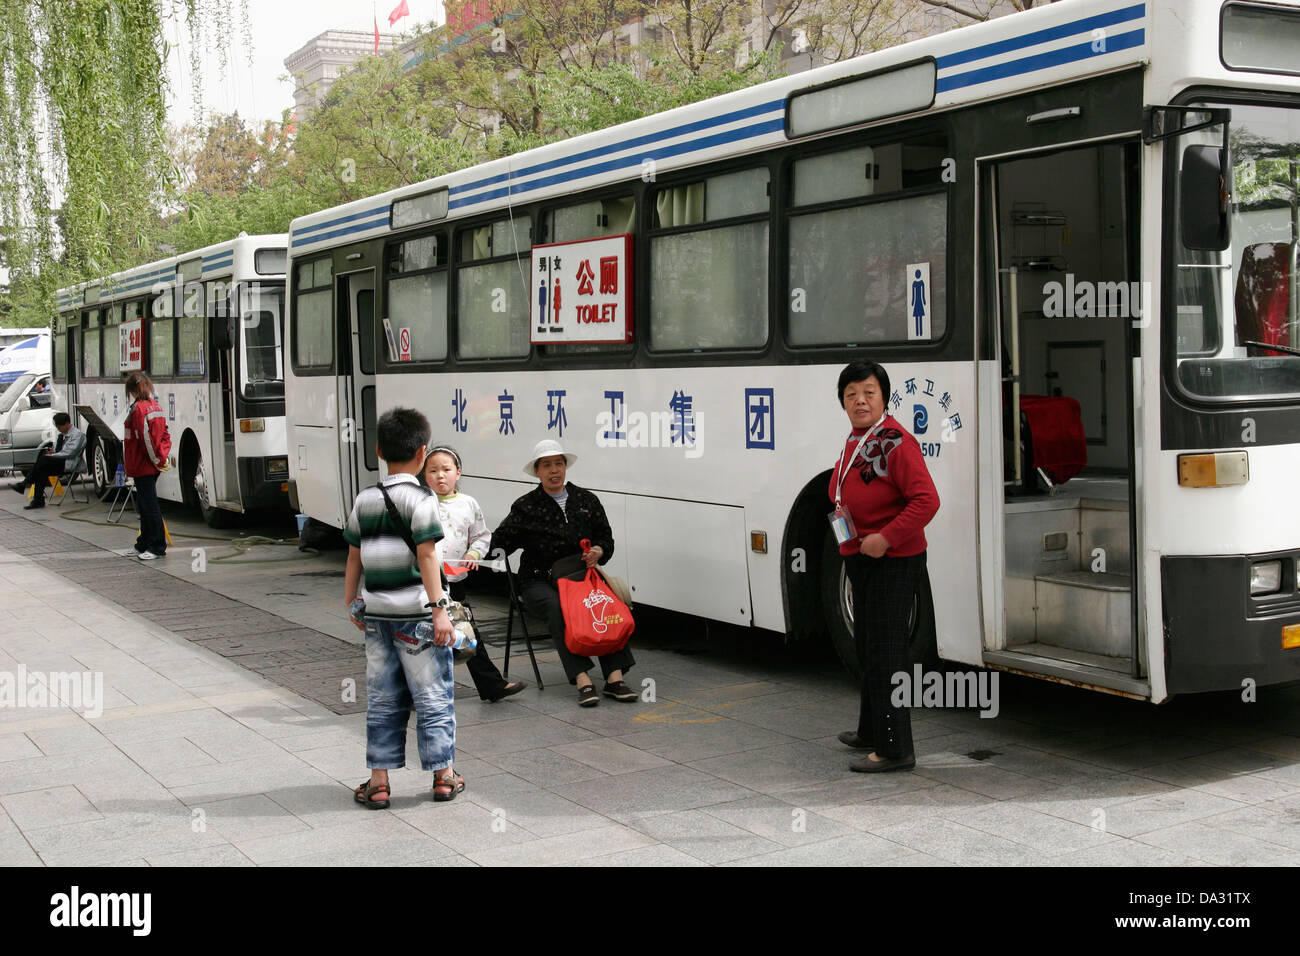 Public toiled made from the bus, Tiananmen Square, Beijing, China Stock Photo